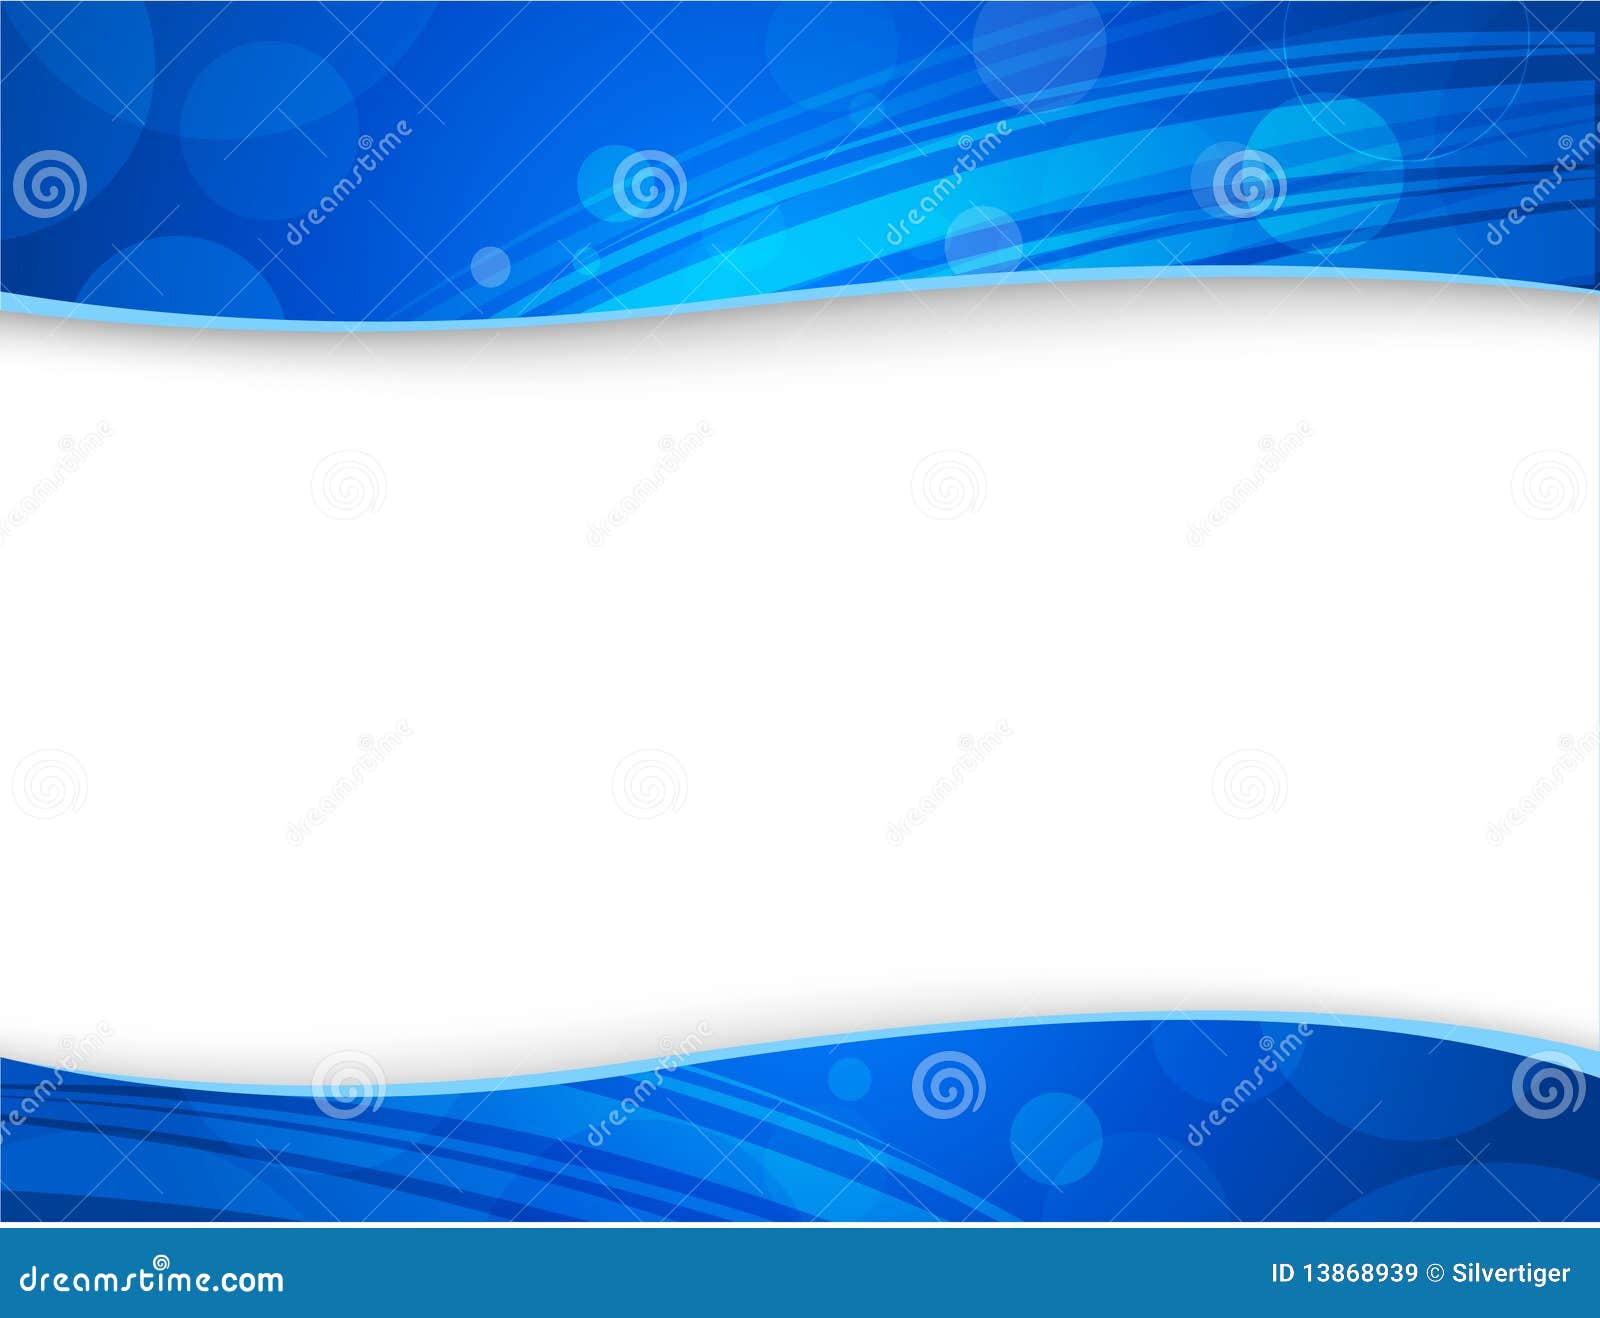 abstract blue backgrounds for header and footer